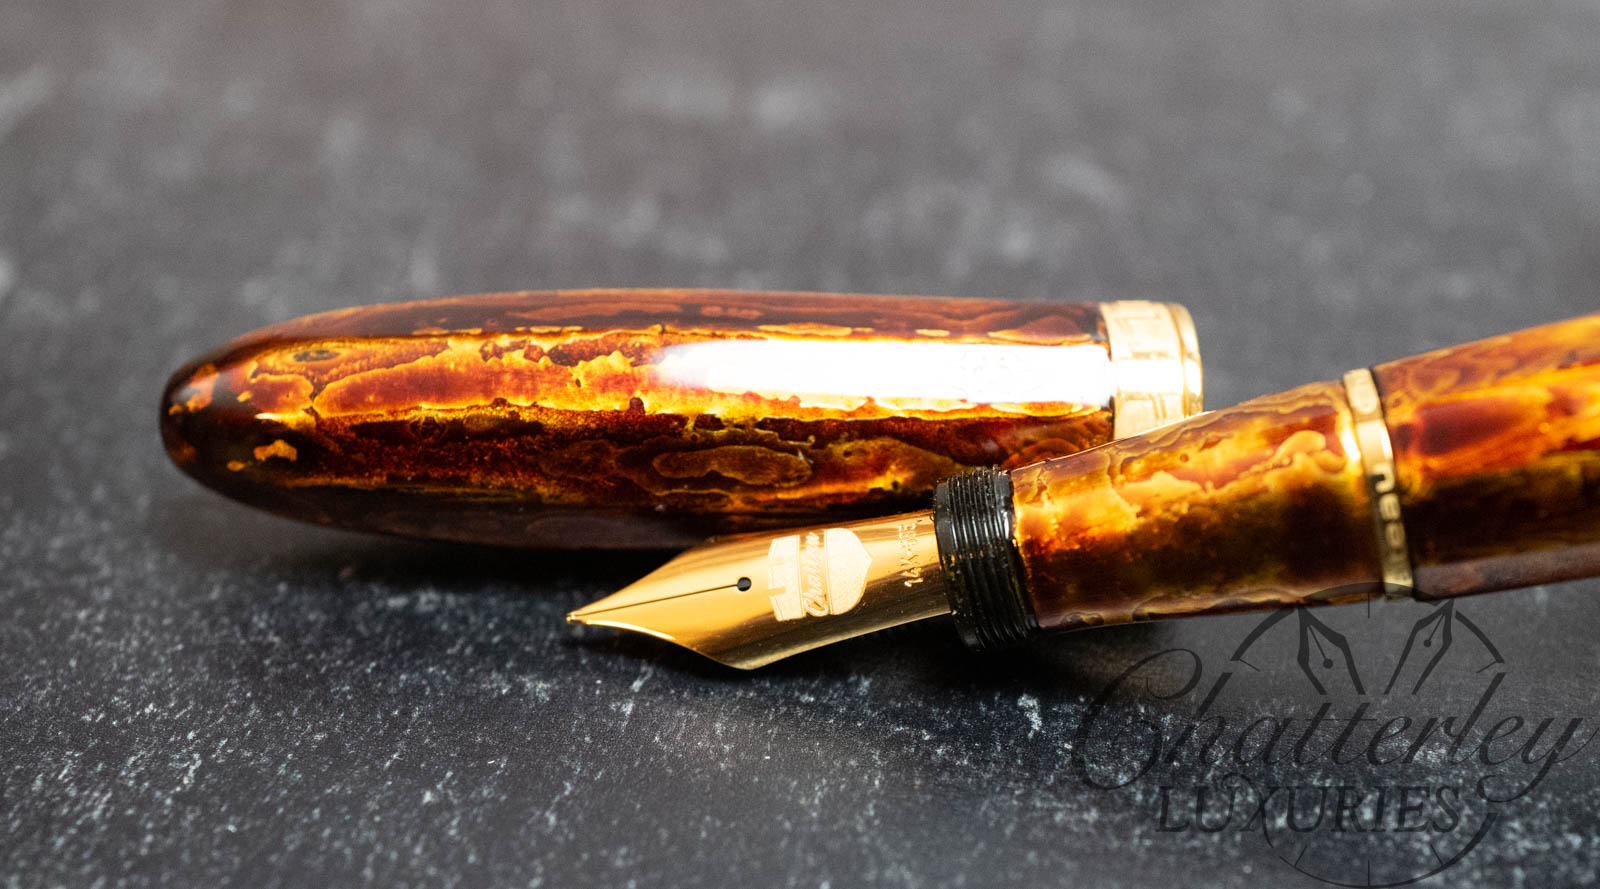 Chateau Monarch UR01 Tame-nuri and Gold Leaf Fountain Pen - Chatterley